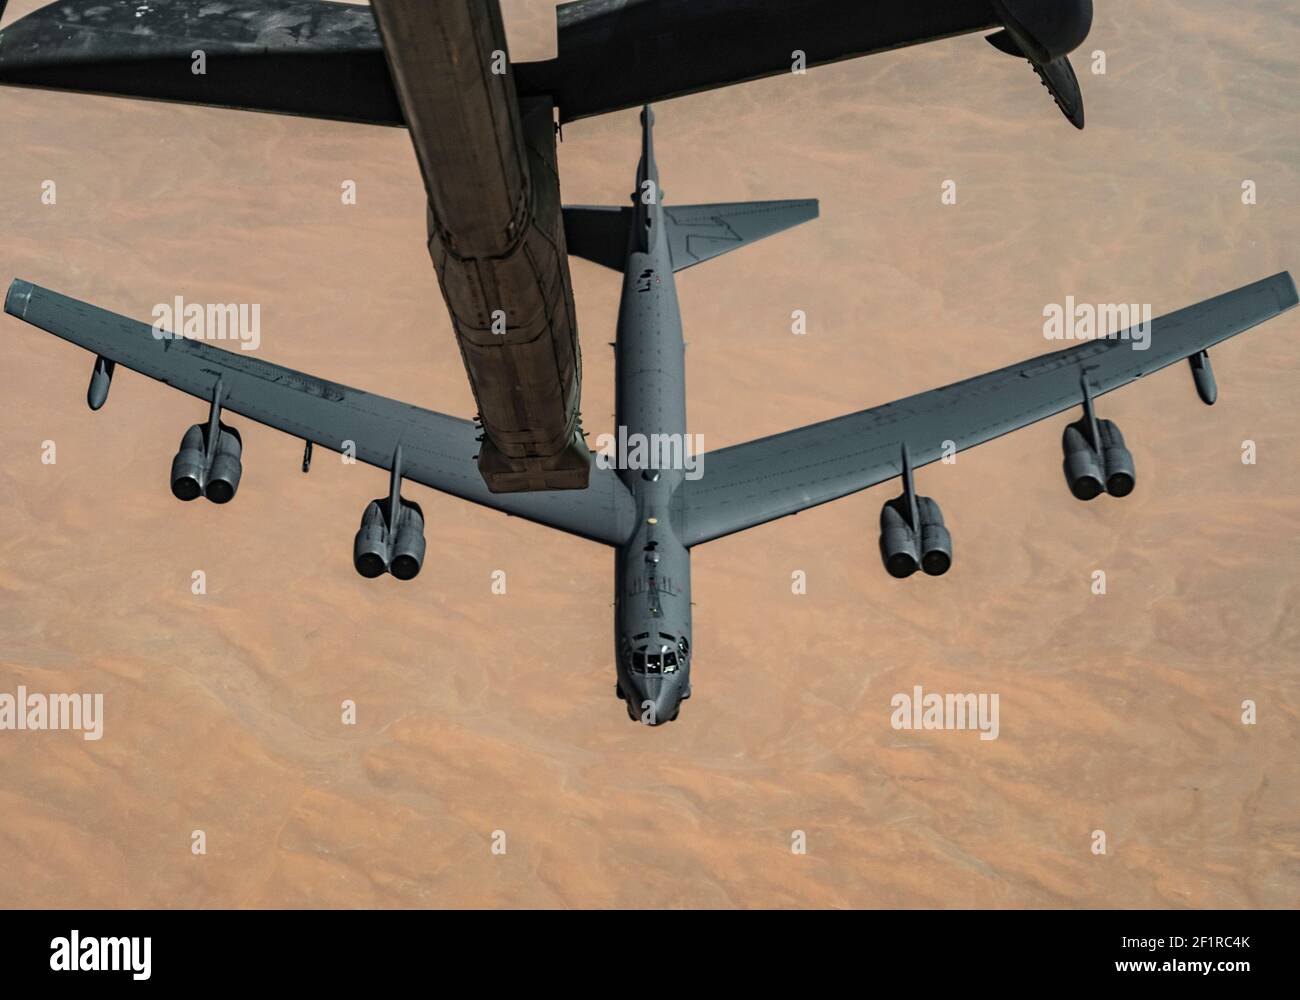 A U.S. Air Force B-52H Stratofortress strategic bomber assigned to the 5th Bomb Wing refuels from a KC-10 Extender assigned to the 908th Expeditionary Air Refueling Squadron March 7, 2021 over the Persian Gulf. The aircraft flew over the Persian Gulf to deter potential aggression by Iran. Stock Photo